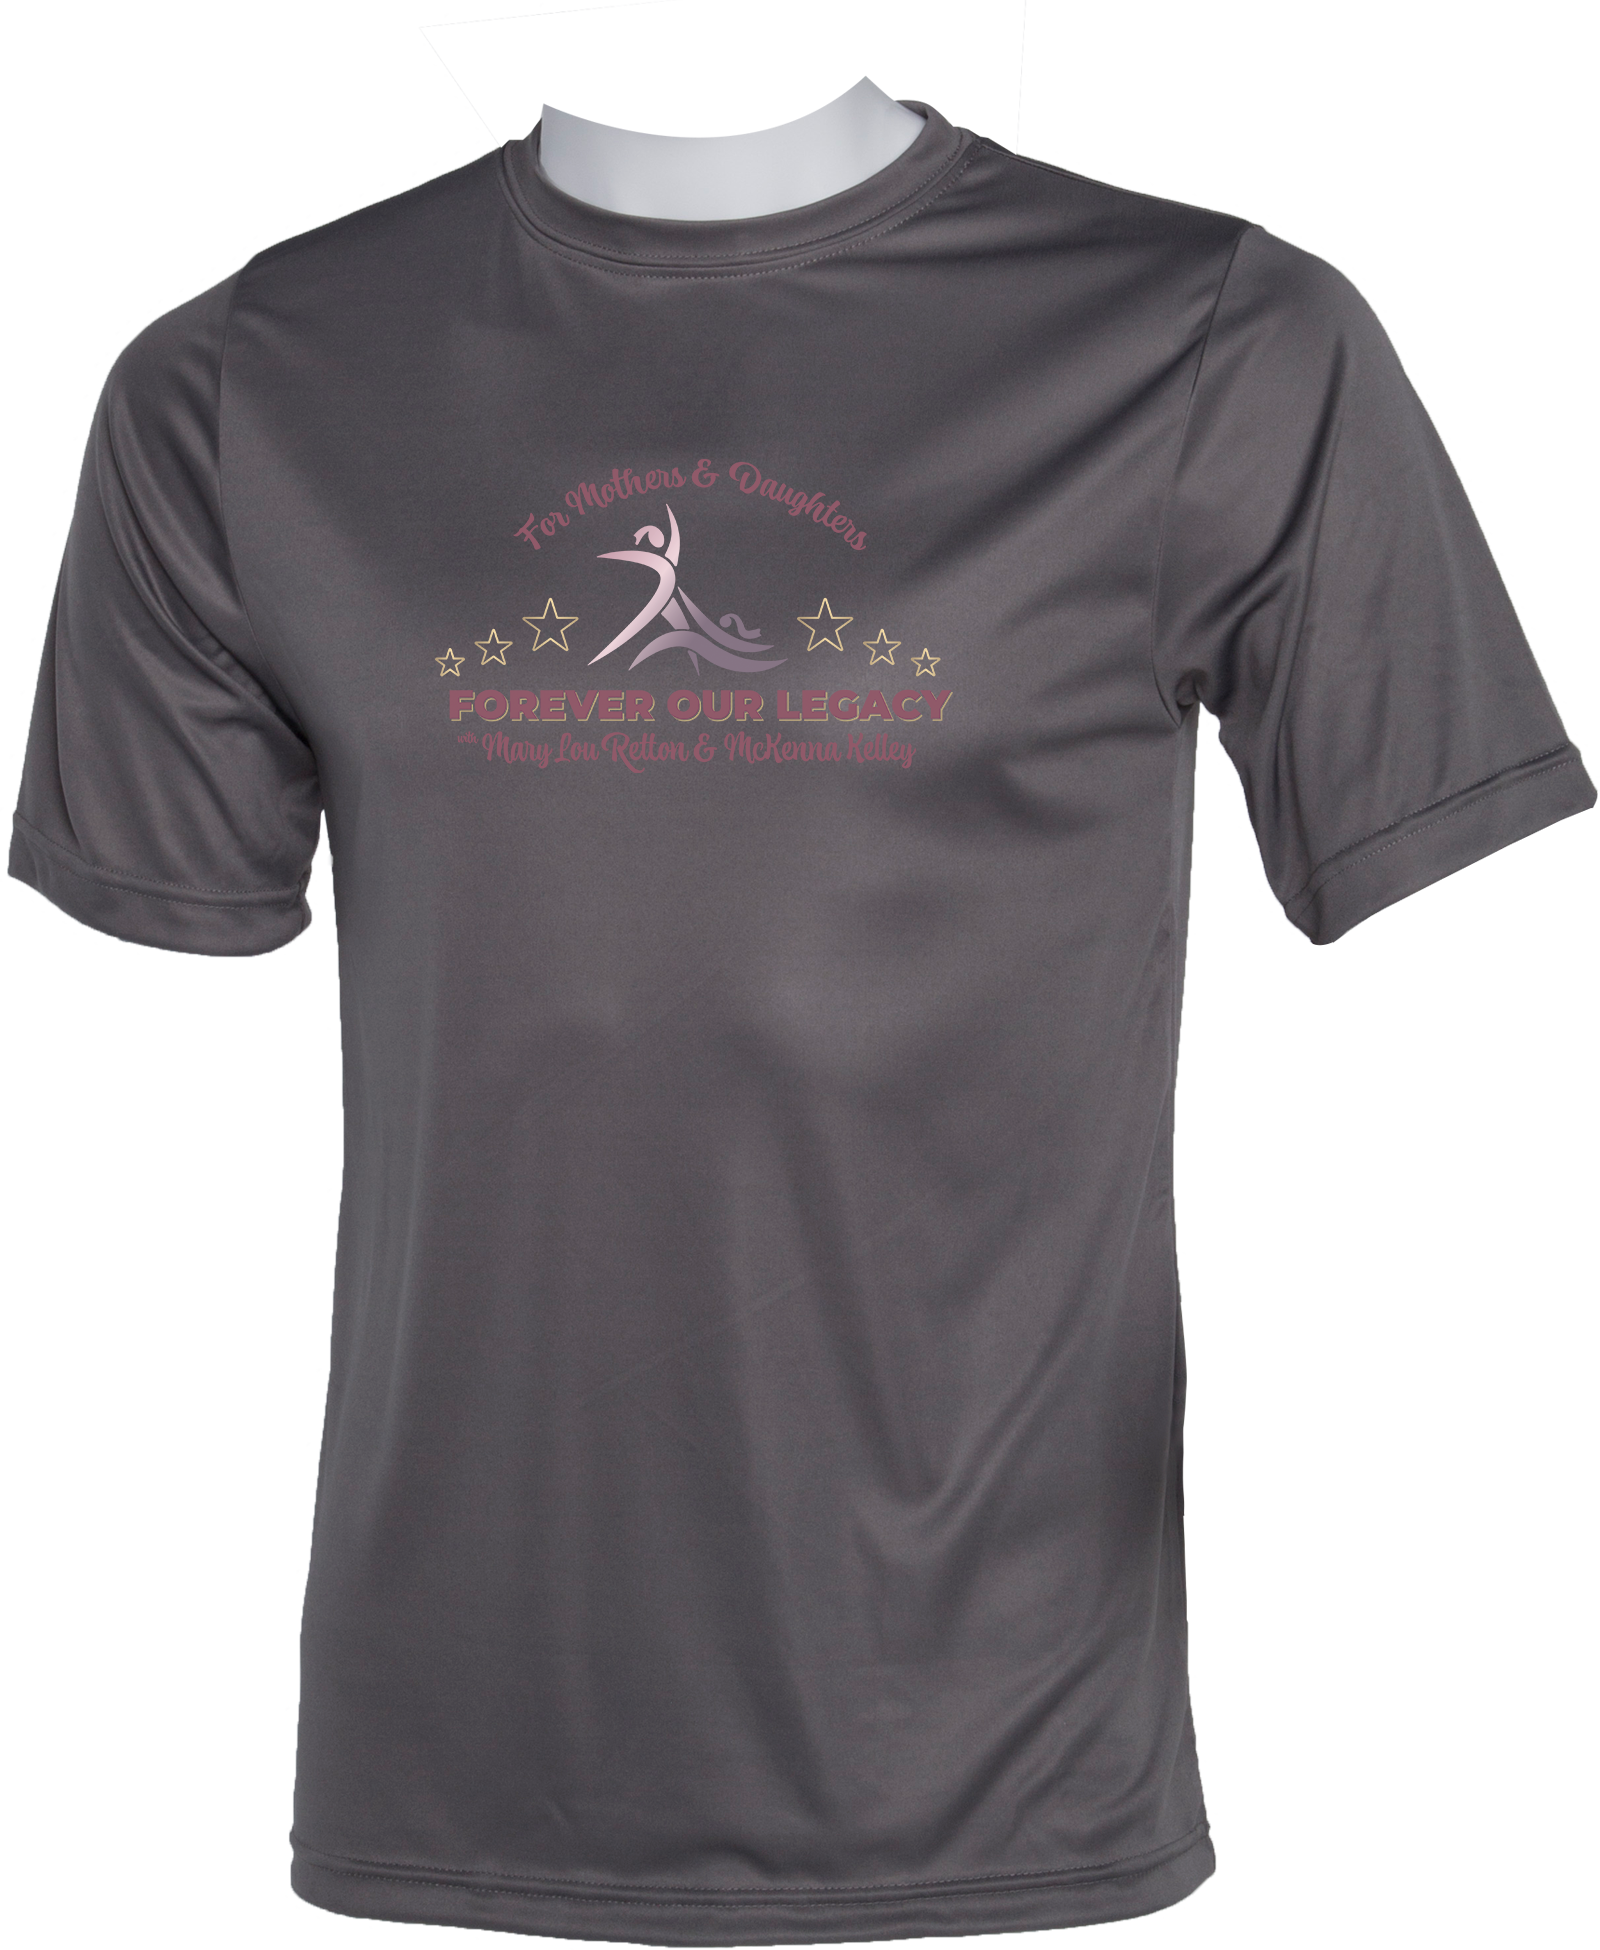 PERFORMANCE SHIRTS - 2023 For Mothers & Daughters Forever Our Legacy with Mary Lou Retton and Mckenna Kelley